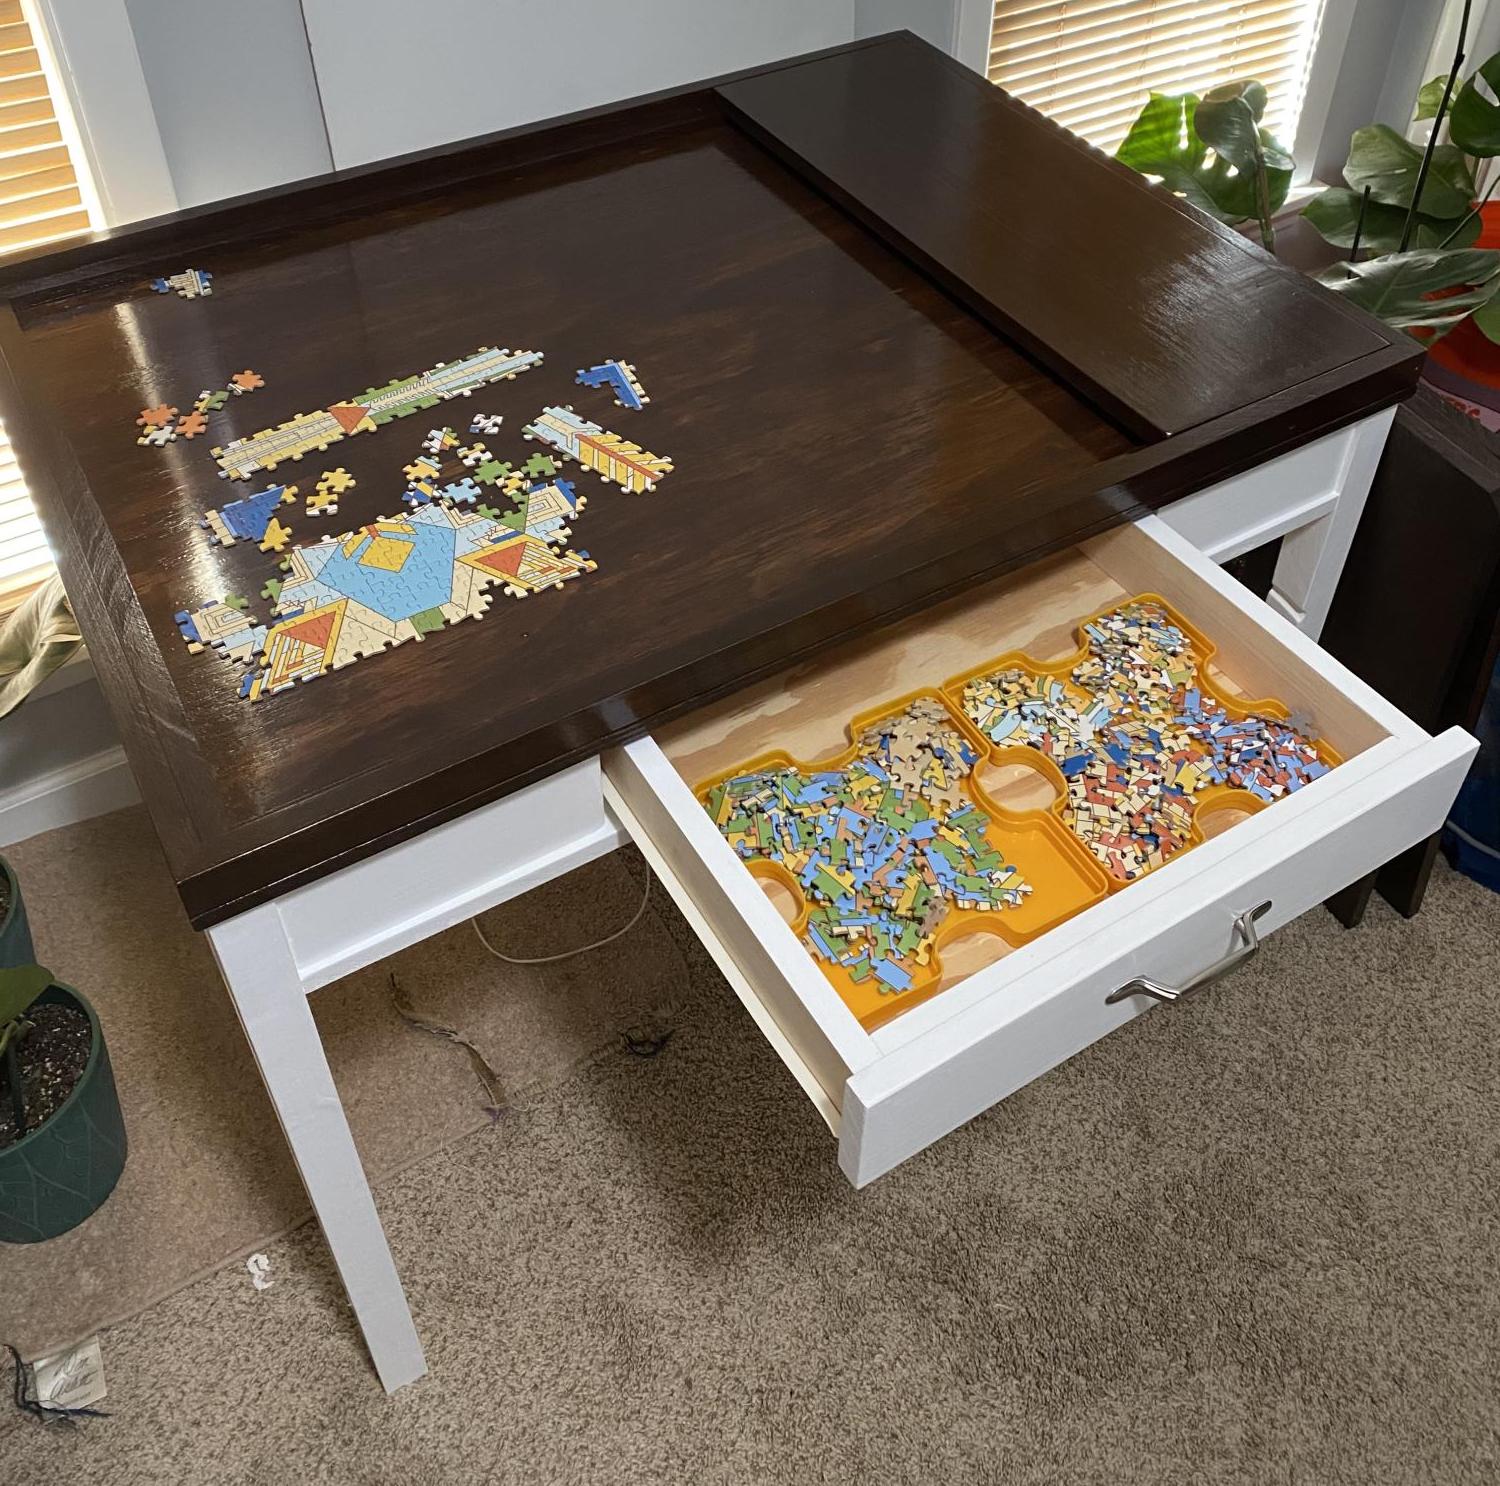 A mechanical table with a hidden puzzle surface 